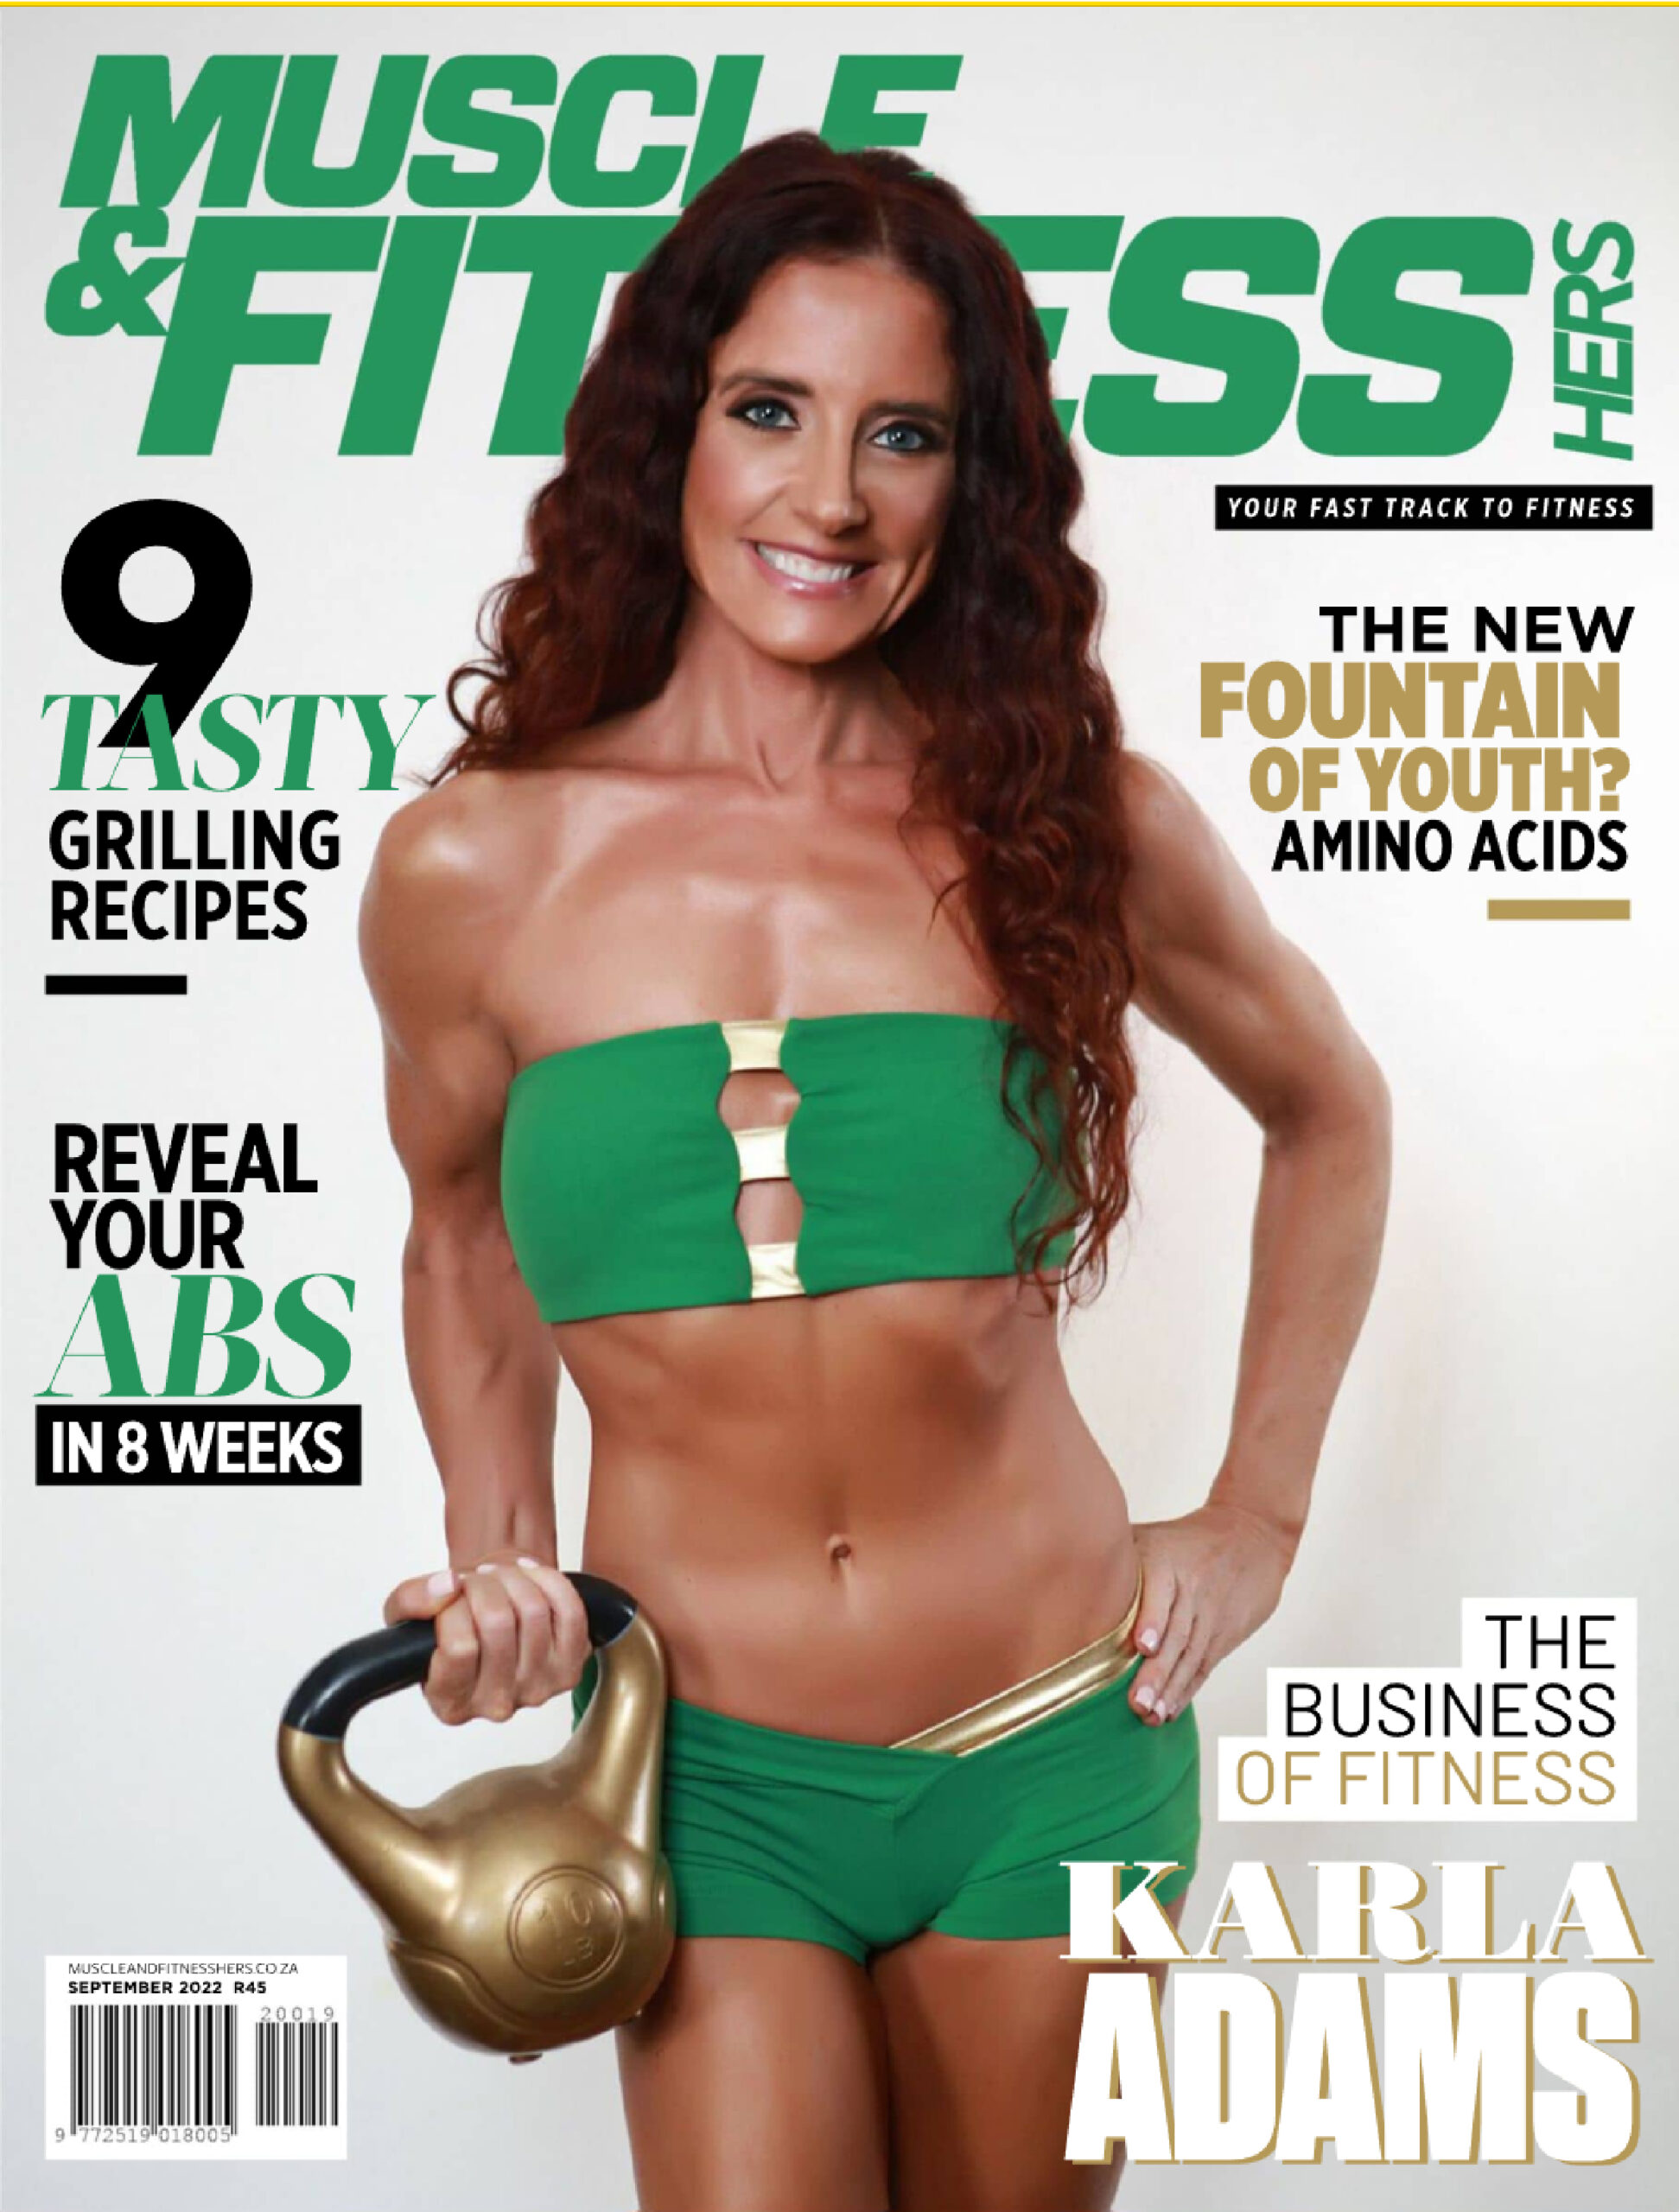 Muscle & Fitness Cover Karla Adams